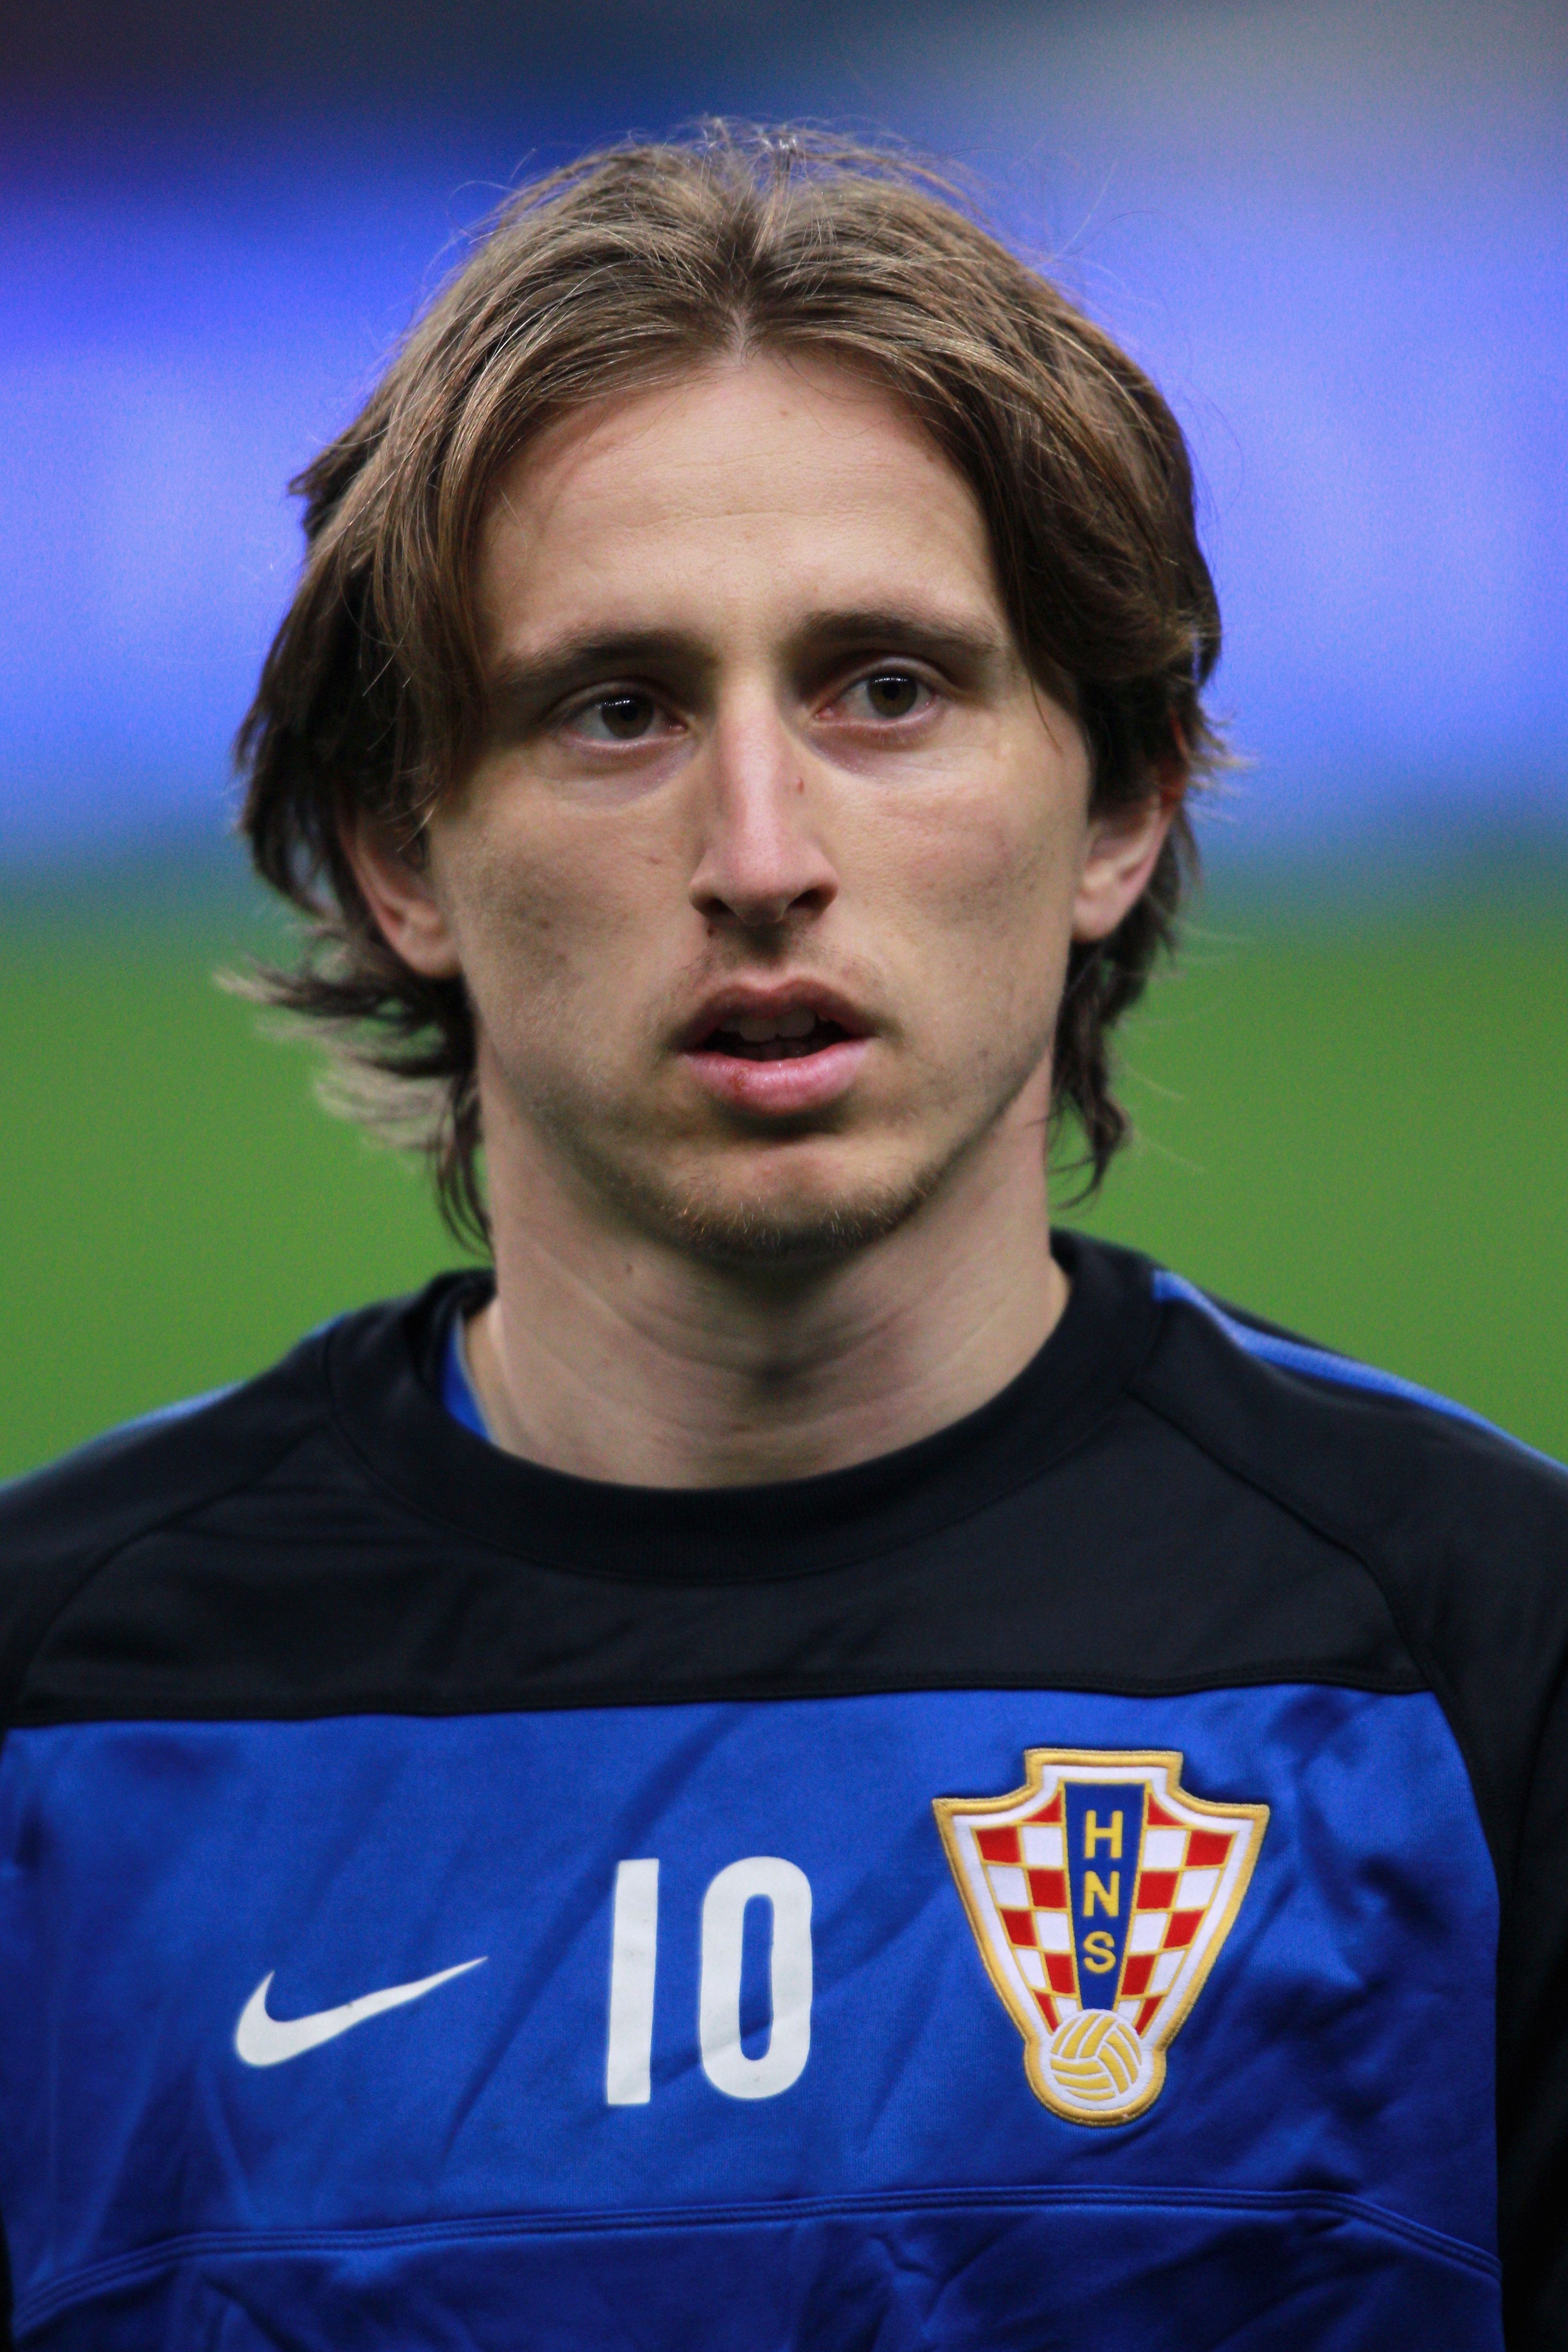 PARIS, FRANCE - MARCH 29:  Luka Modric of Croatia looks on prior to the International friendly match between France and Croatia at Stade de France at Stade de France on March 29, 2011 in Paris, France.  (Photo by Dean Mouhtaropoulos/Getty Images)